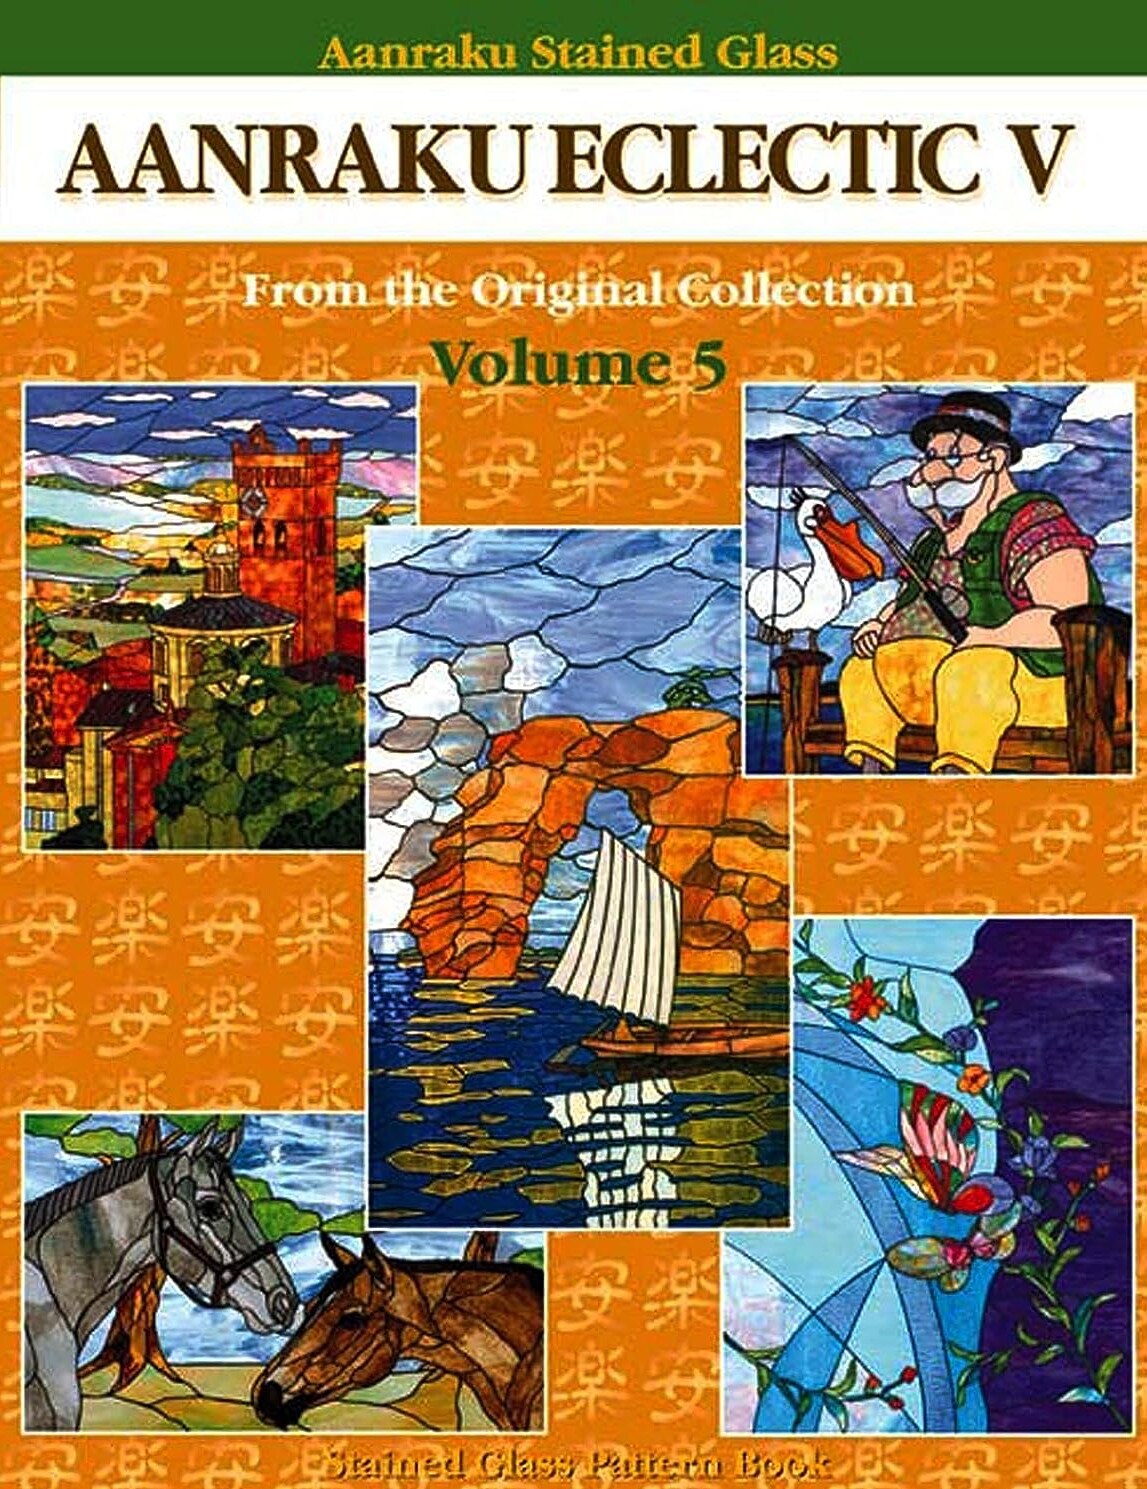 Stained Glass Pattern Book: Aanraku Eclectic Stained Glass Pattern Book Volume 5